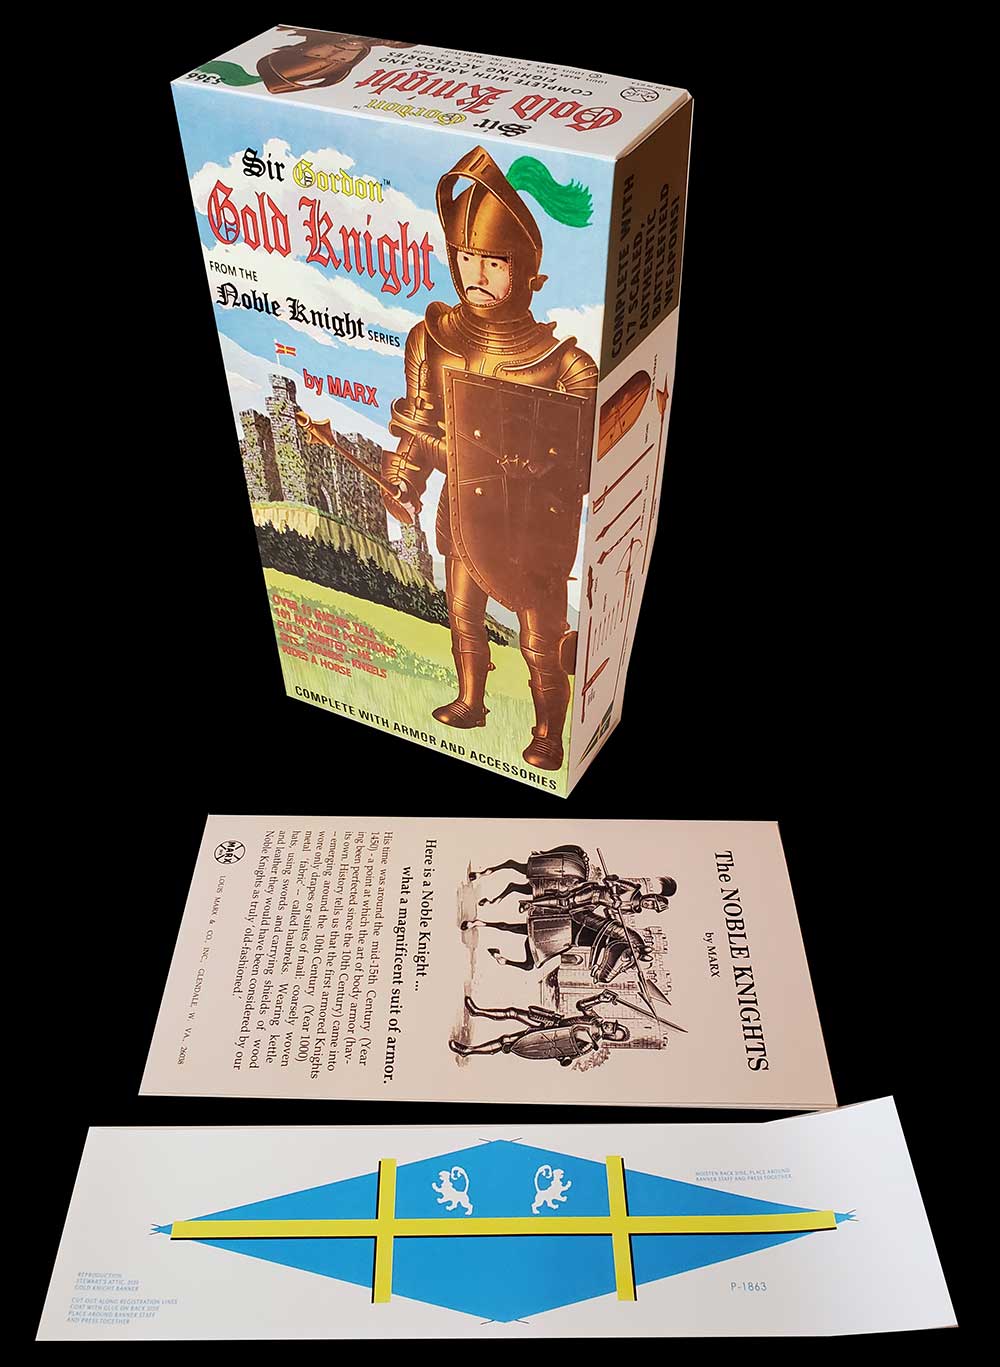 Knight – US Gold Knight, Sir Gordon Reproduction Box with Manual and Banner